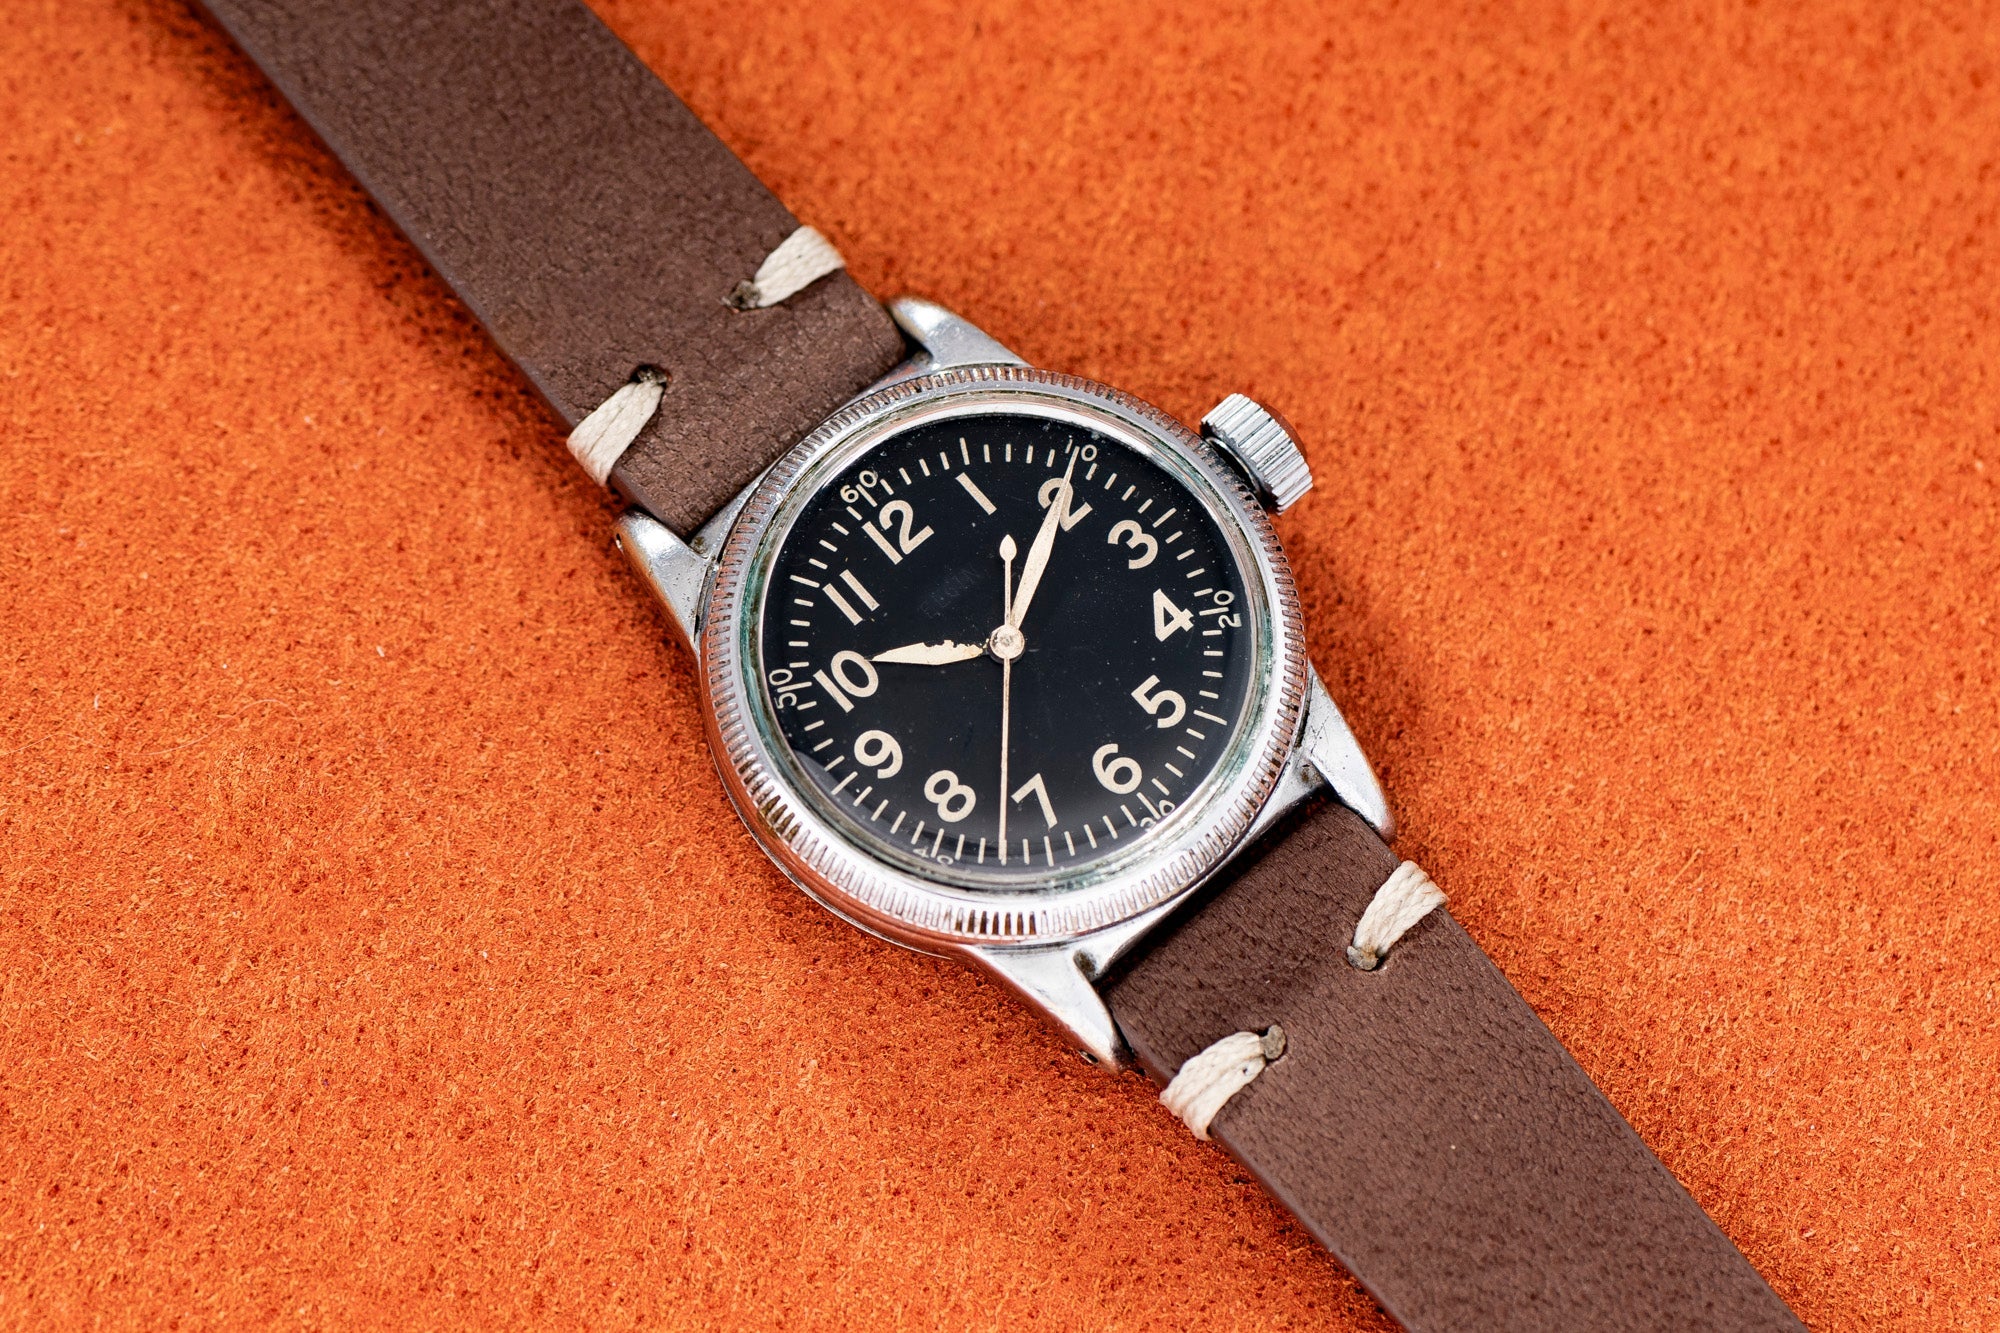 Everest Journal The Most Important World War II Field Watches